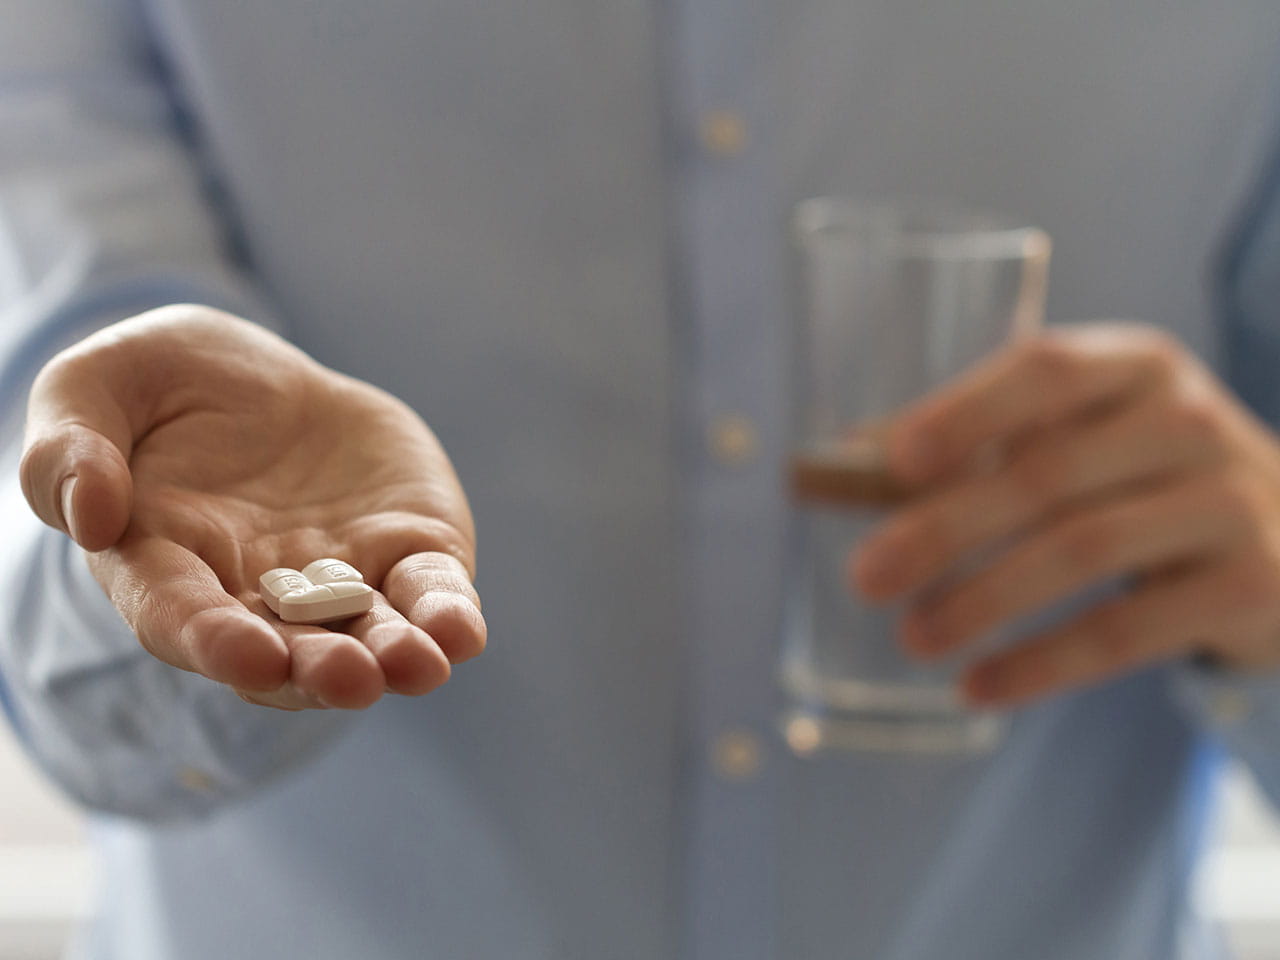 Man holding out his hand with painkillers